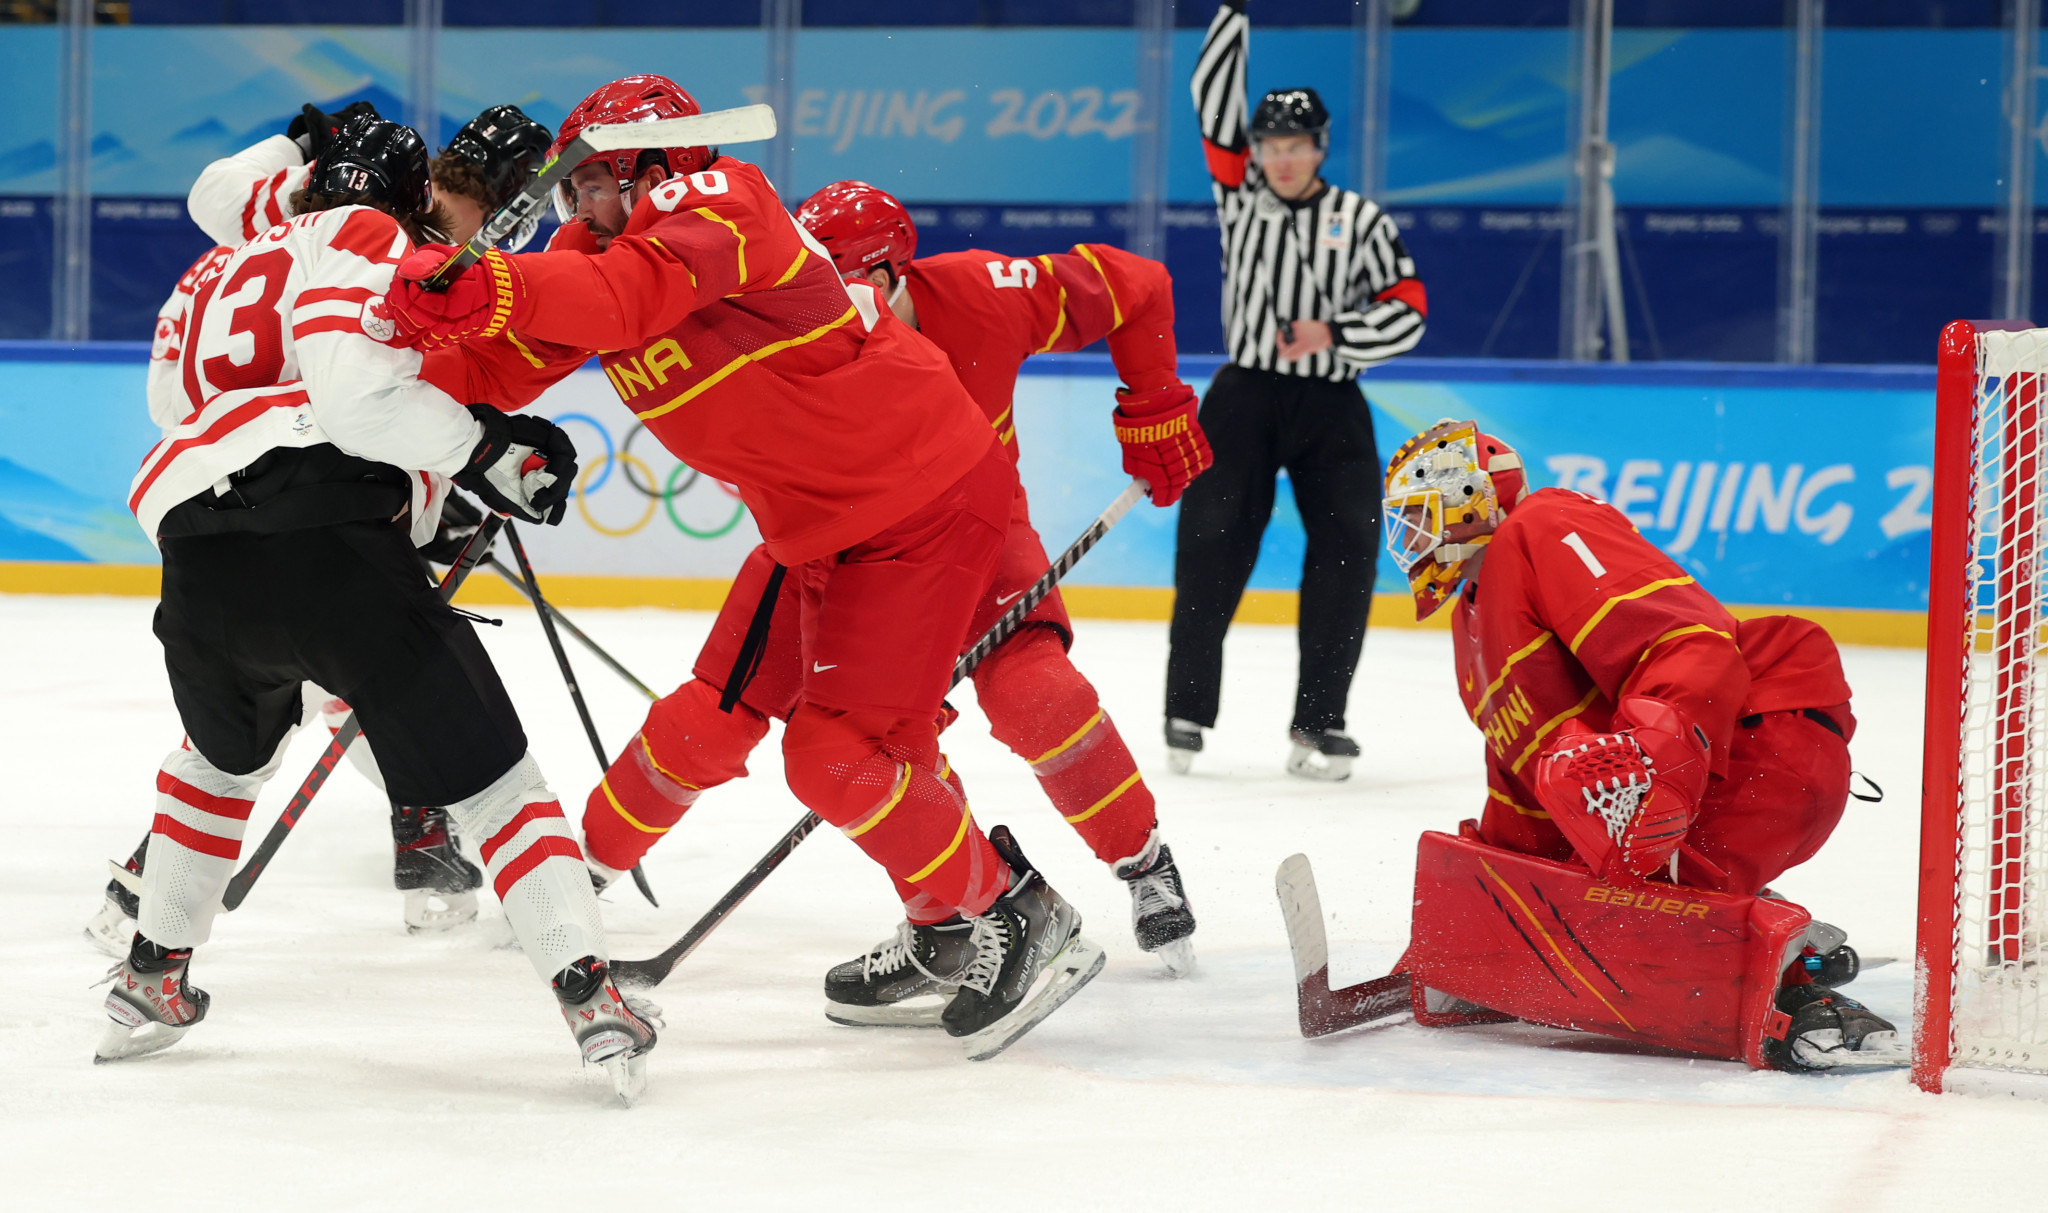 Action from the men's ice hockey Group A match between Canada and China ©Getty Images